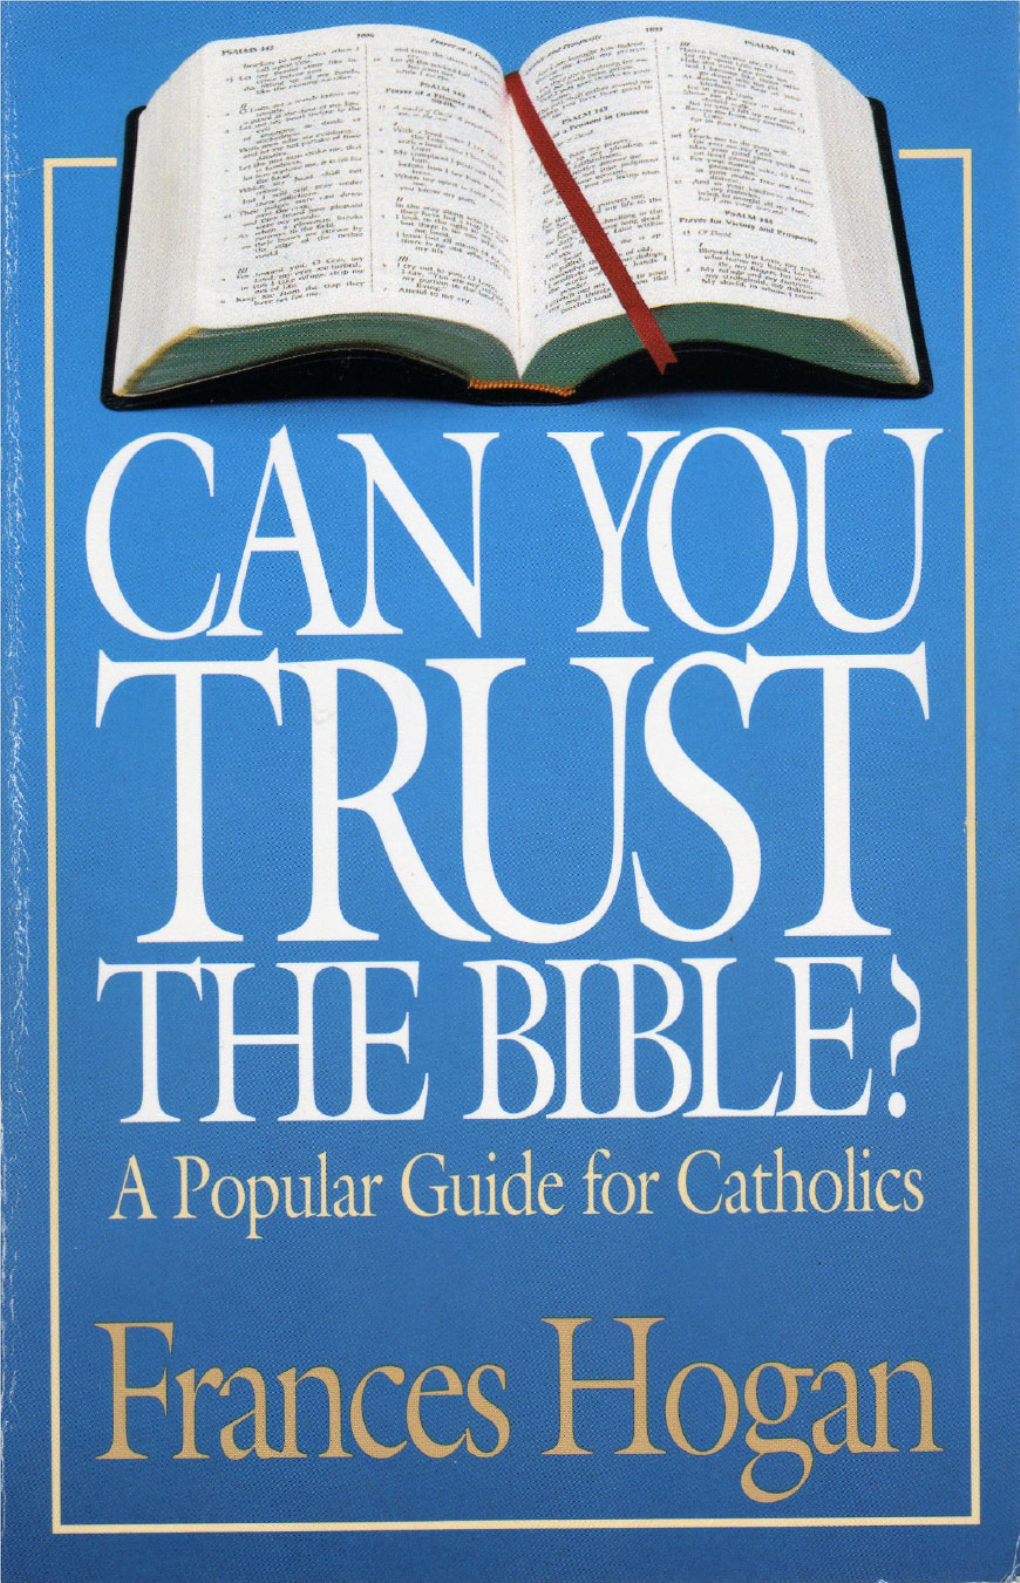 Can You Trust the Bible? a Popular Guide for Catholics